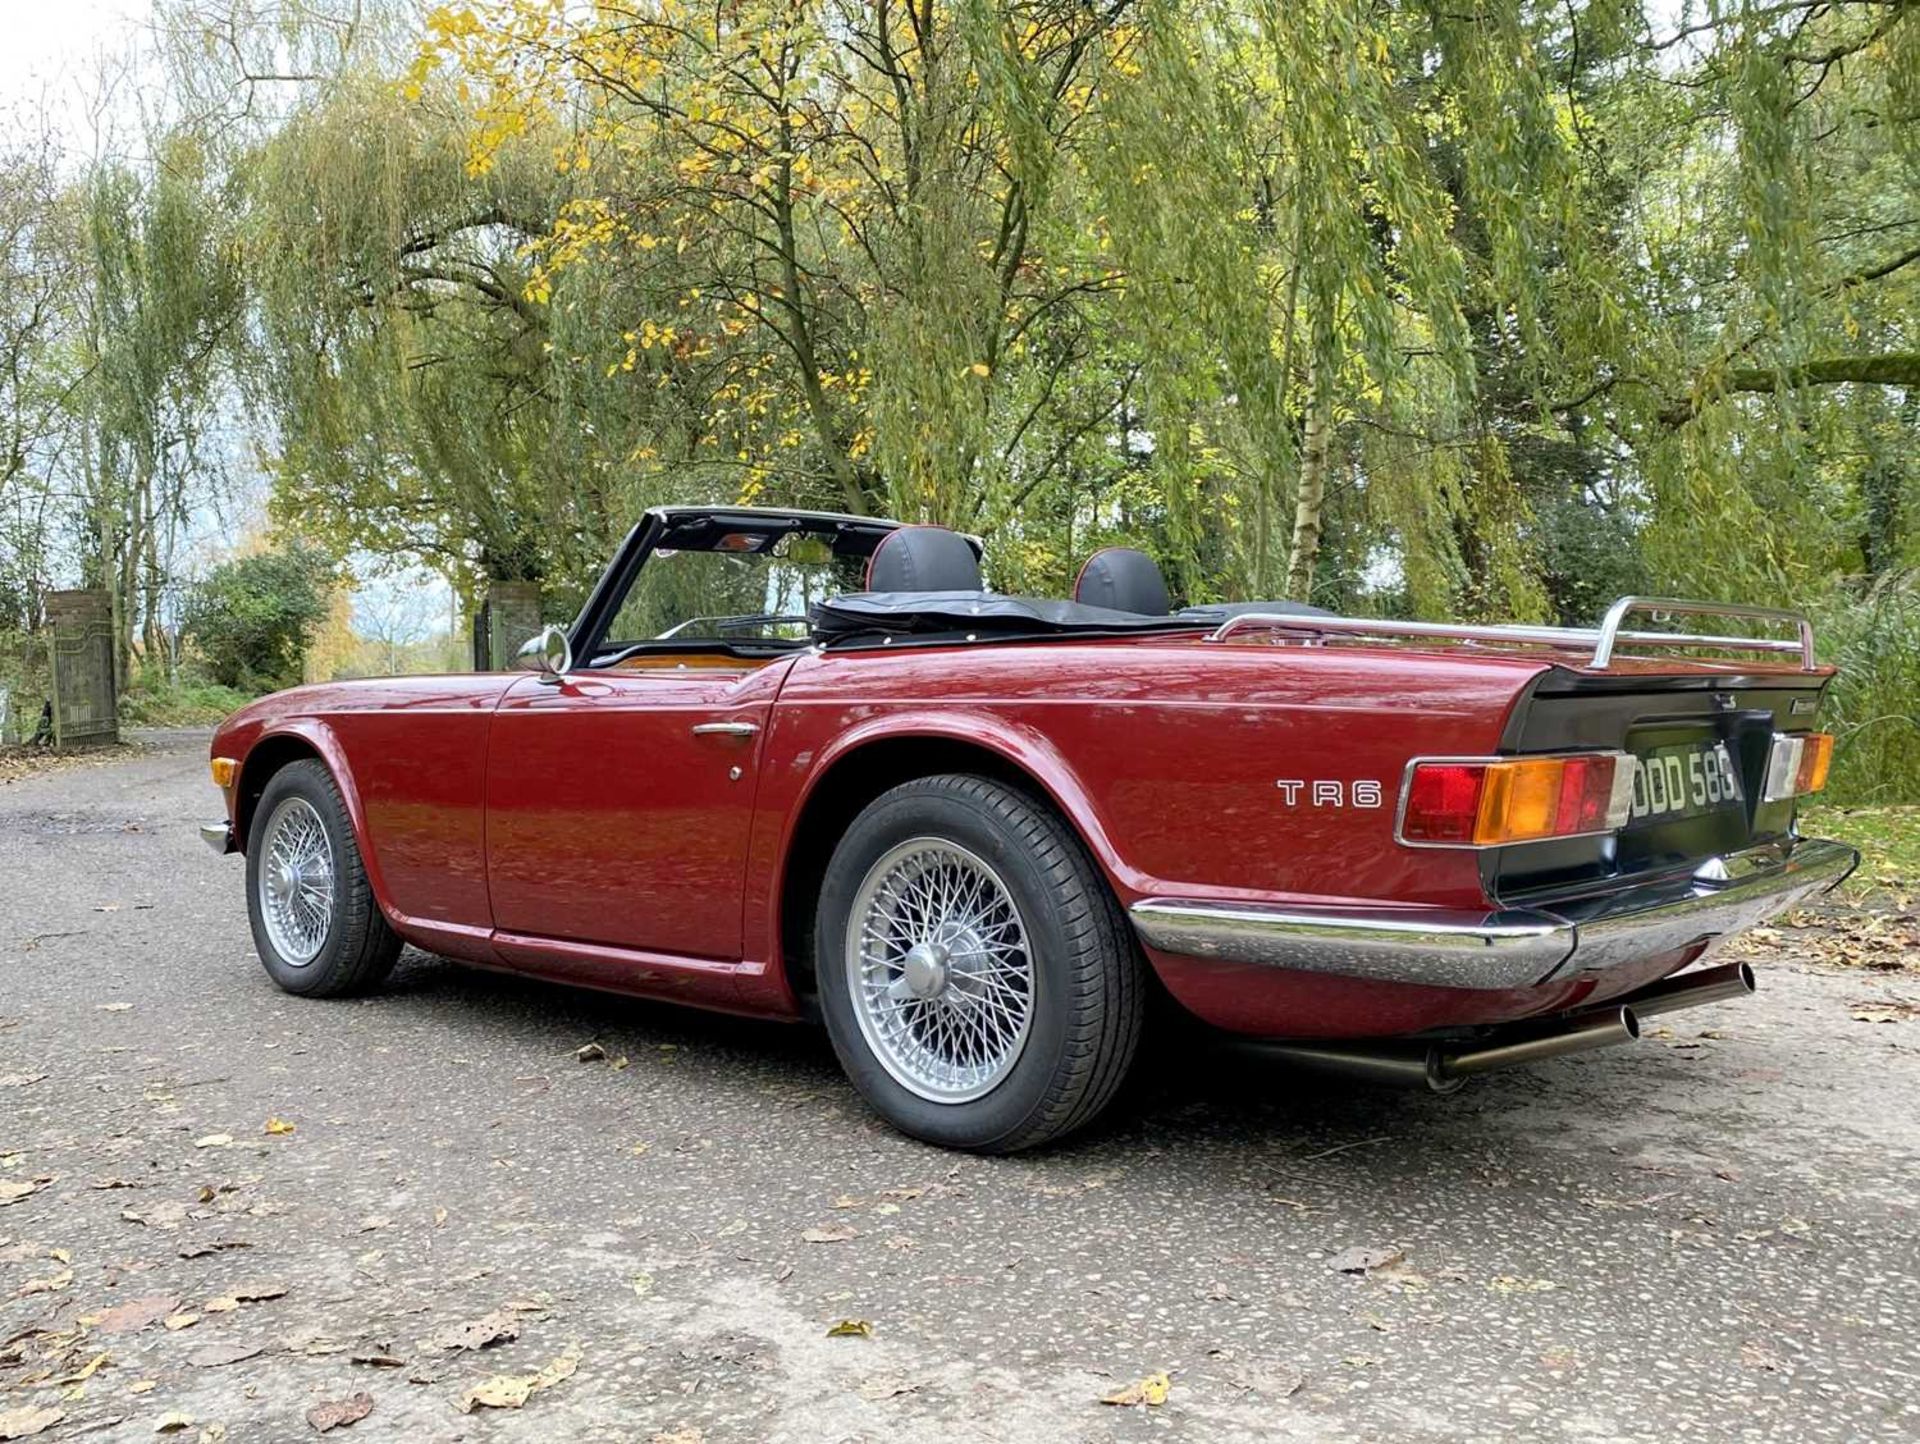 1969 Triumph TR6 Desirable early example - Image 32 of 100